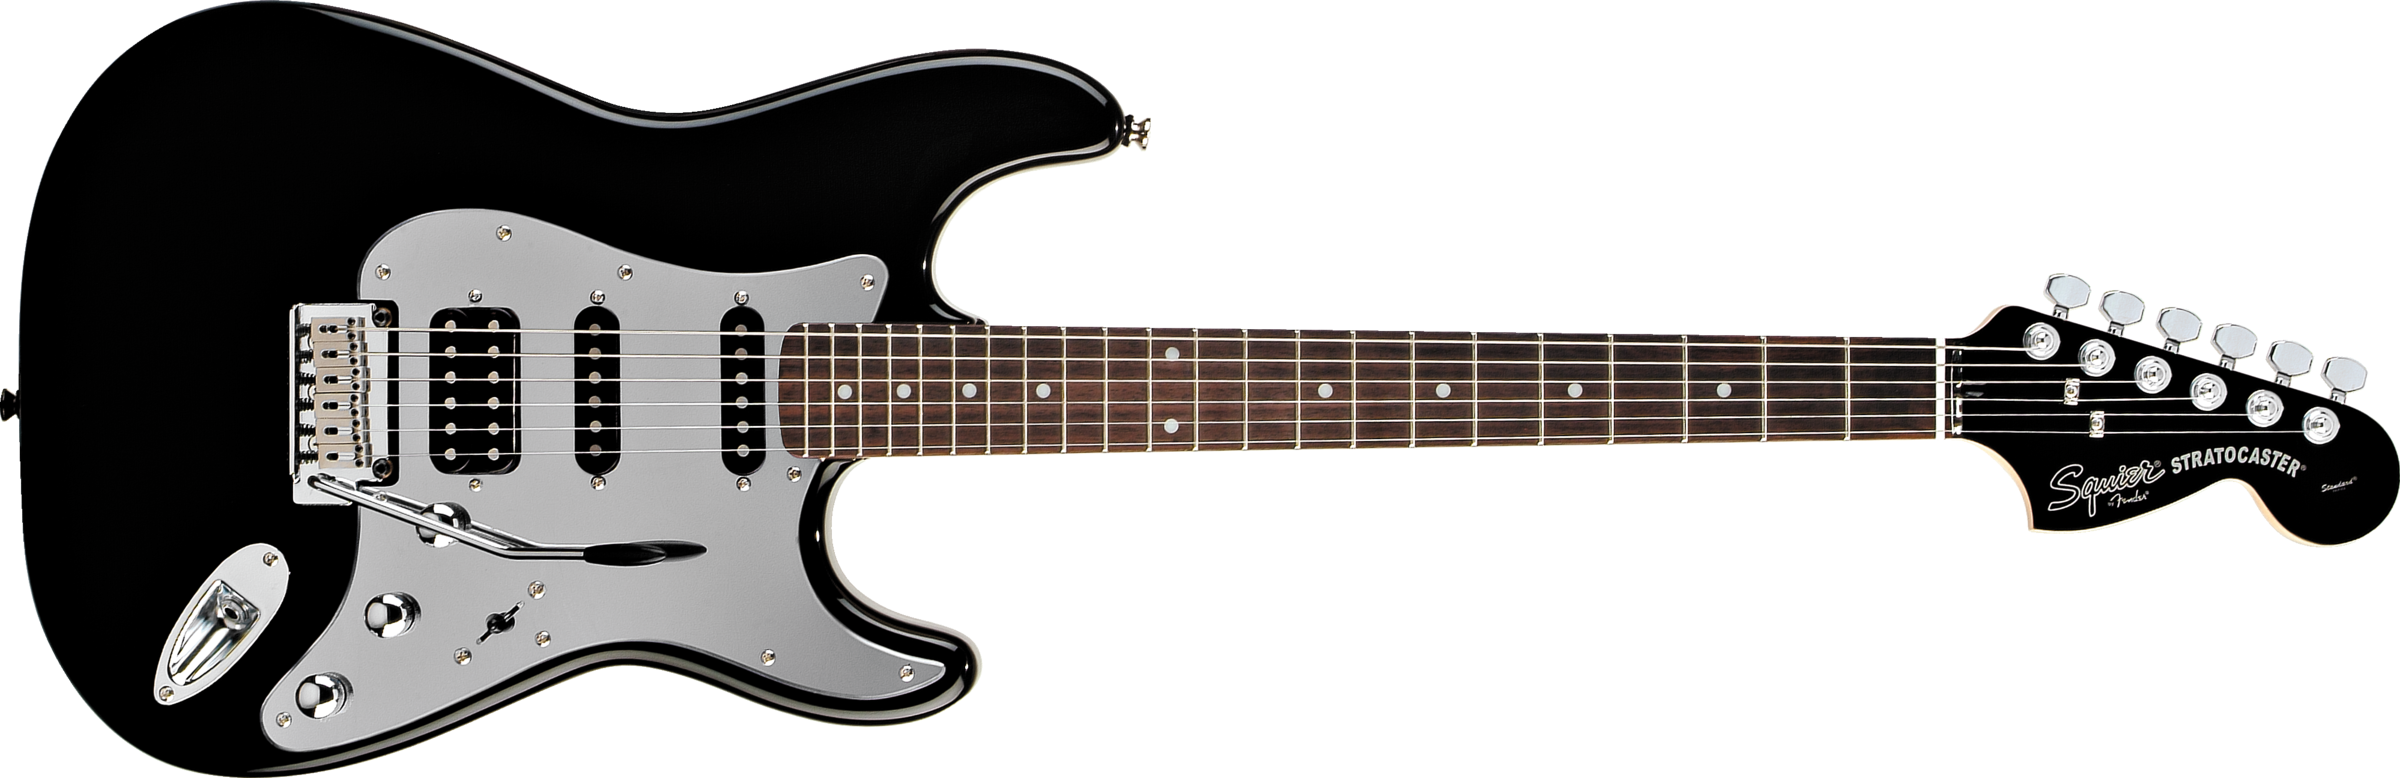 Guitar PNG High-Quality Image